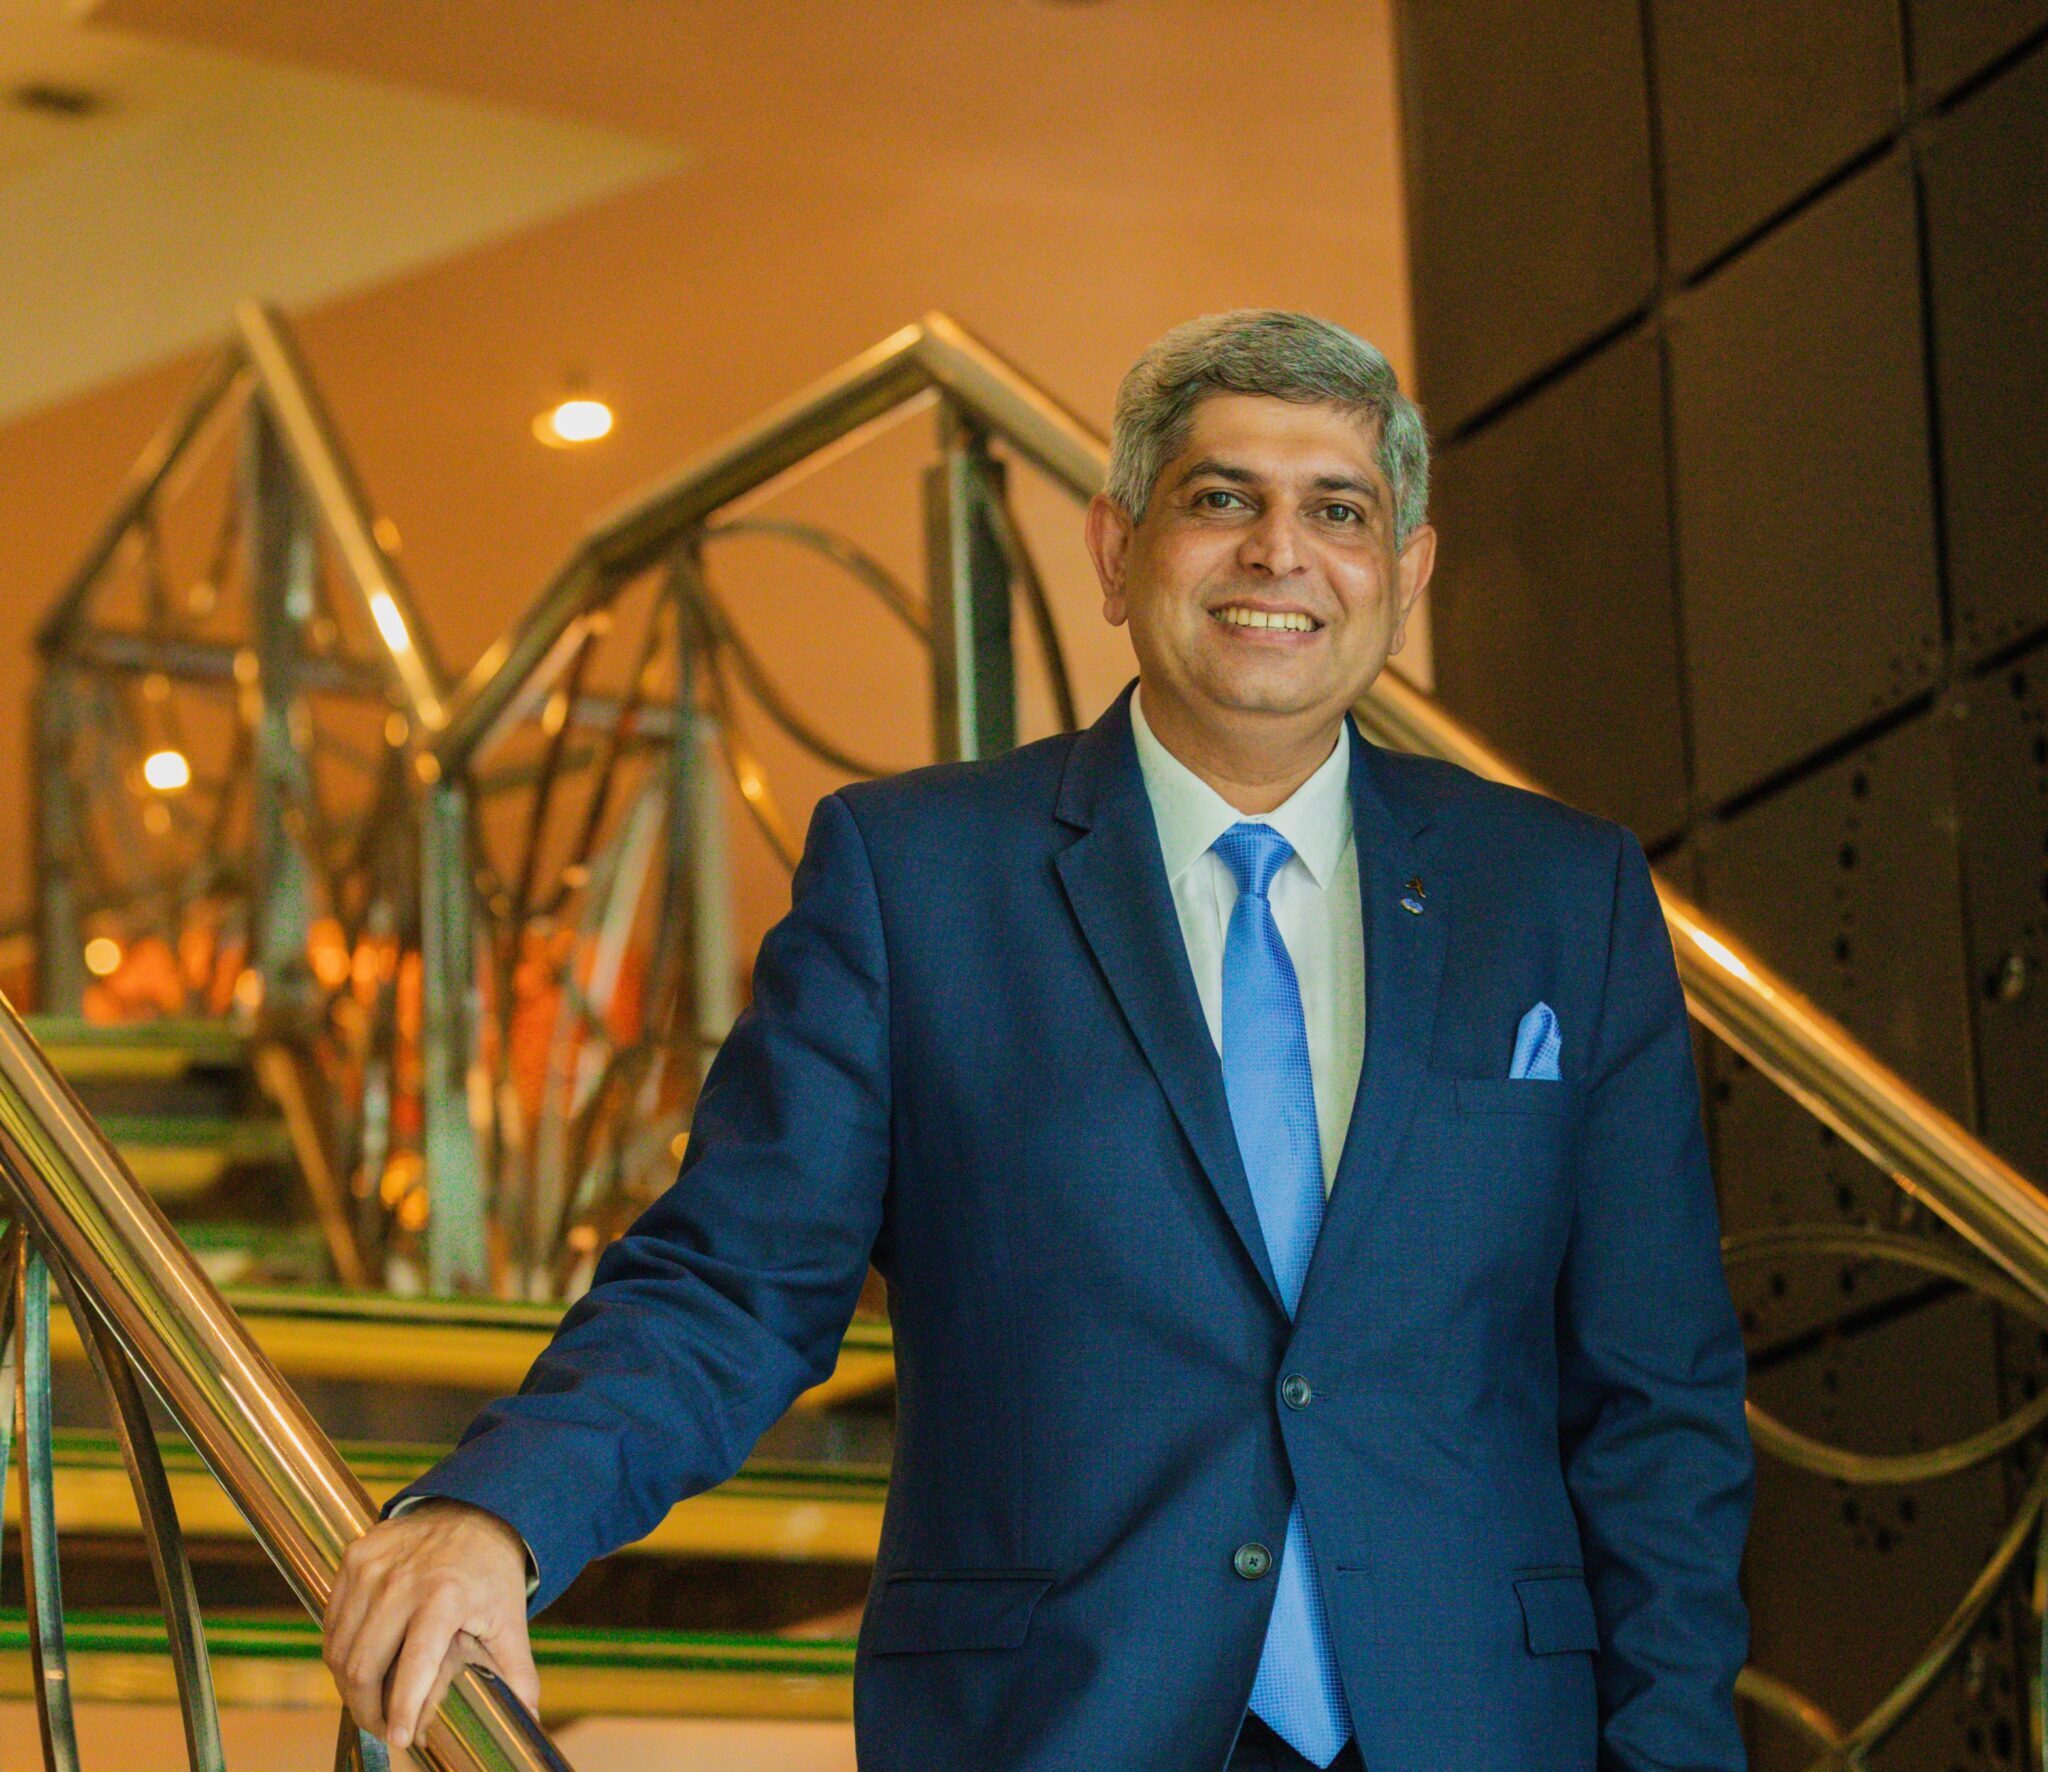 ‘Since Q4, 2022, we have observed upward trends in the hotel business’